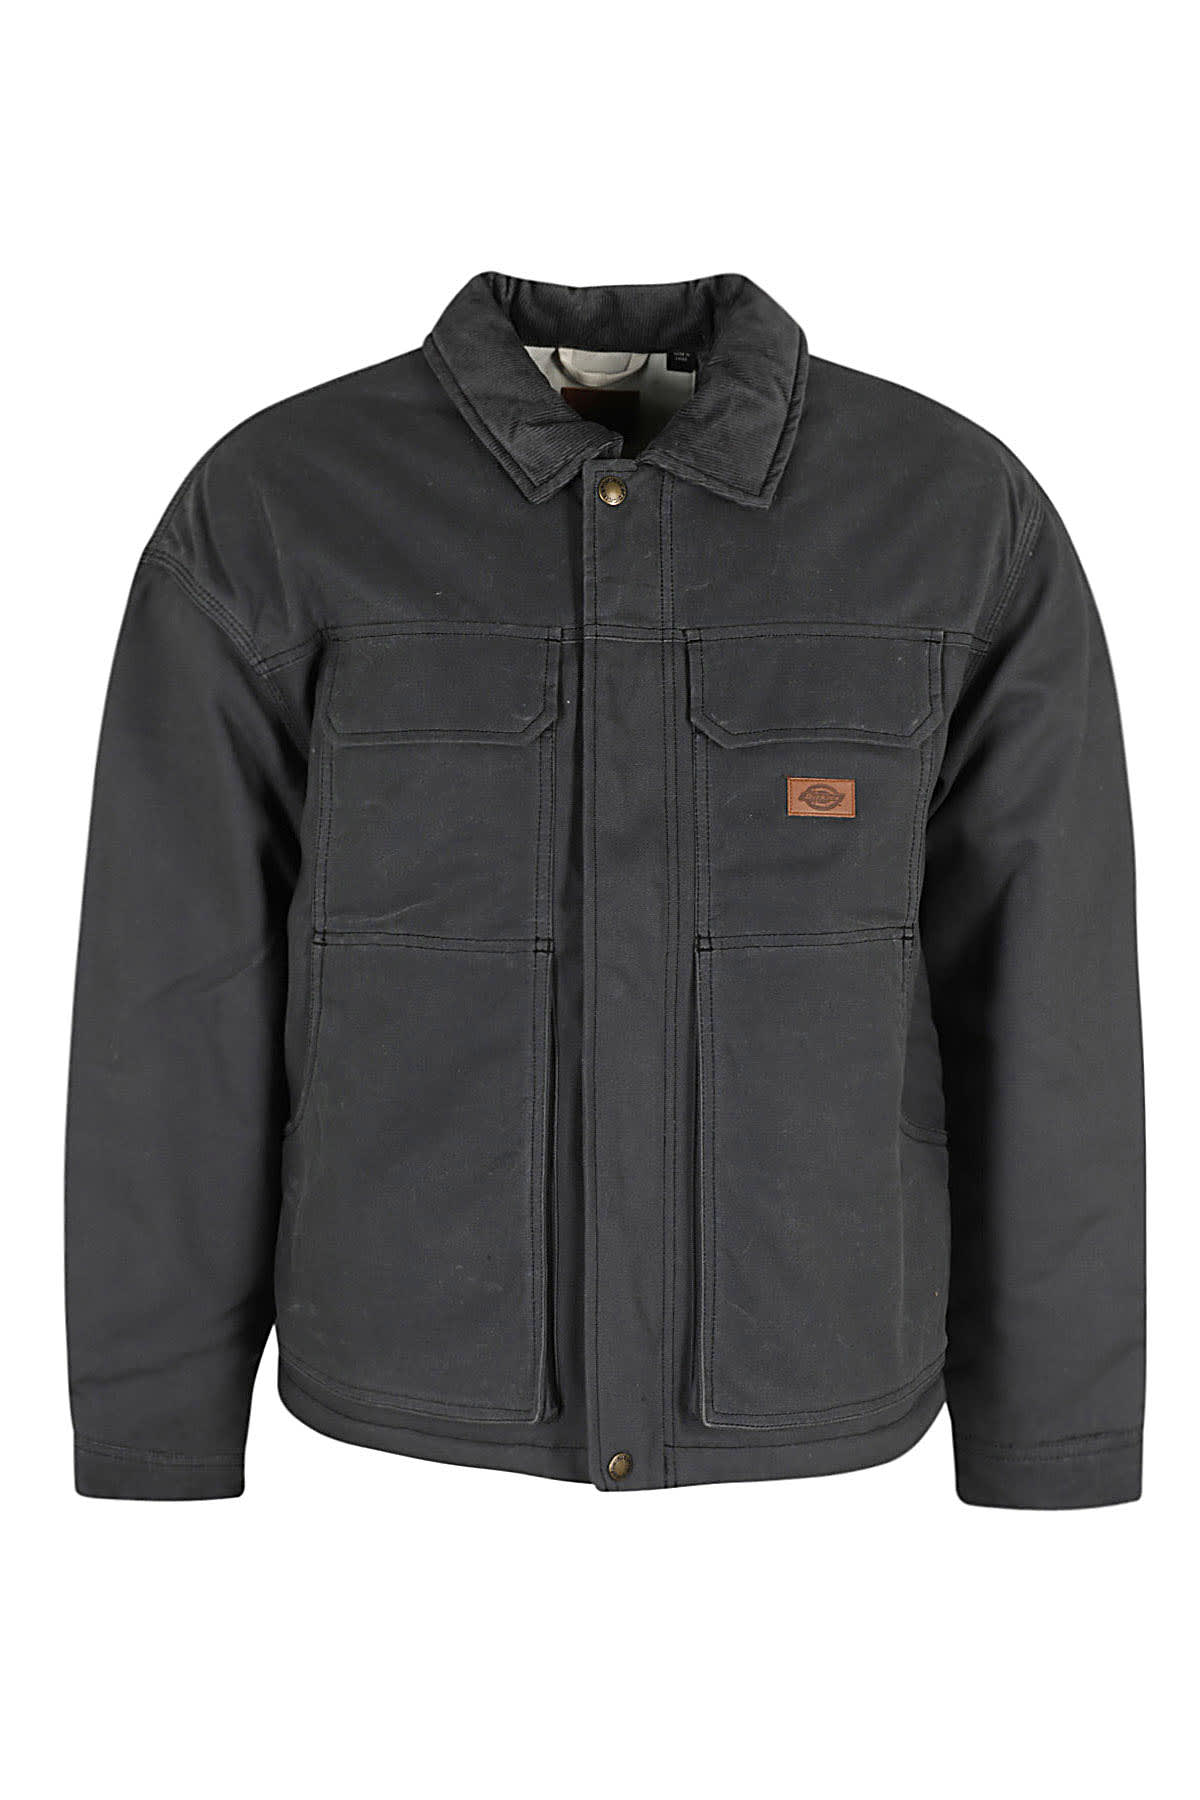 Dickies Lucas Waxed Pocket Front Jacket In Charcoal Grey